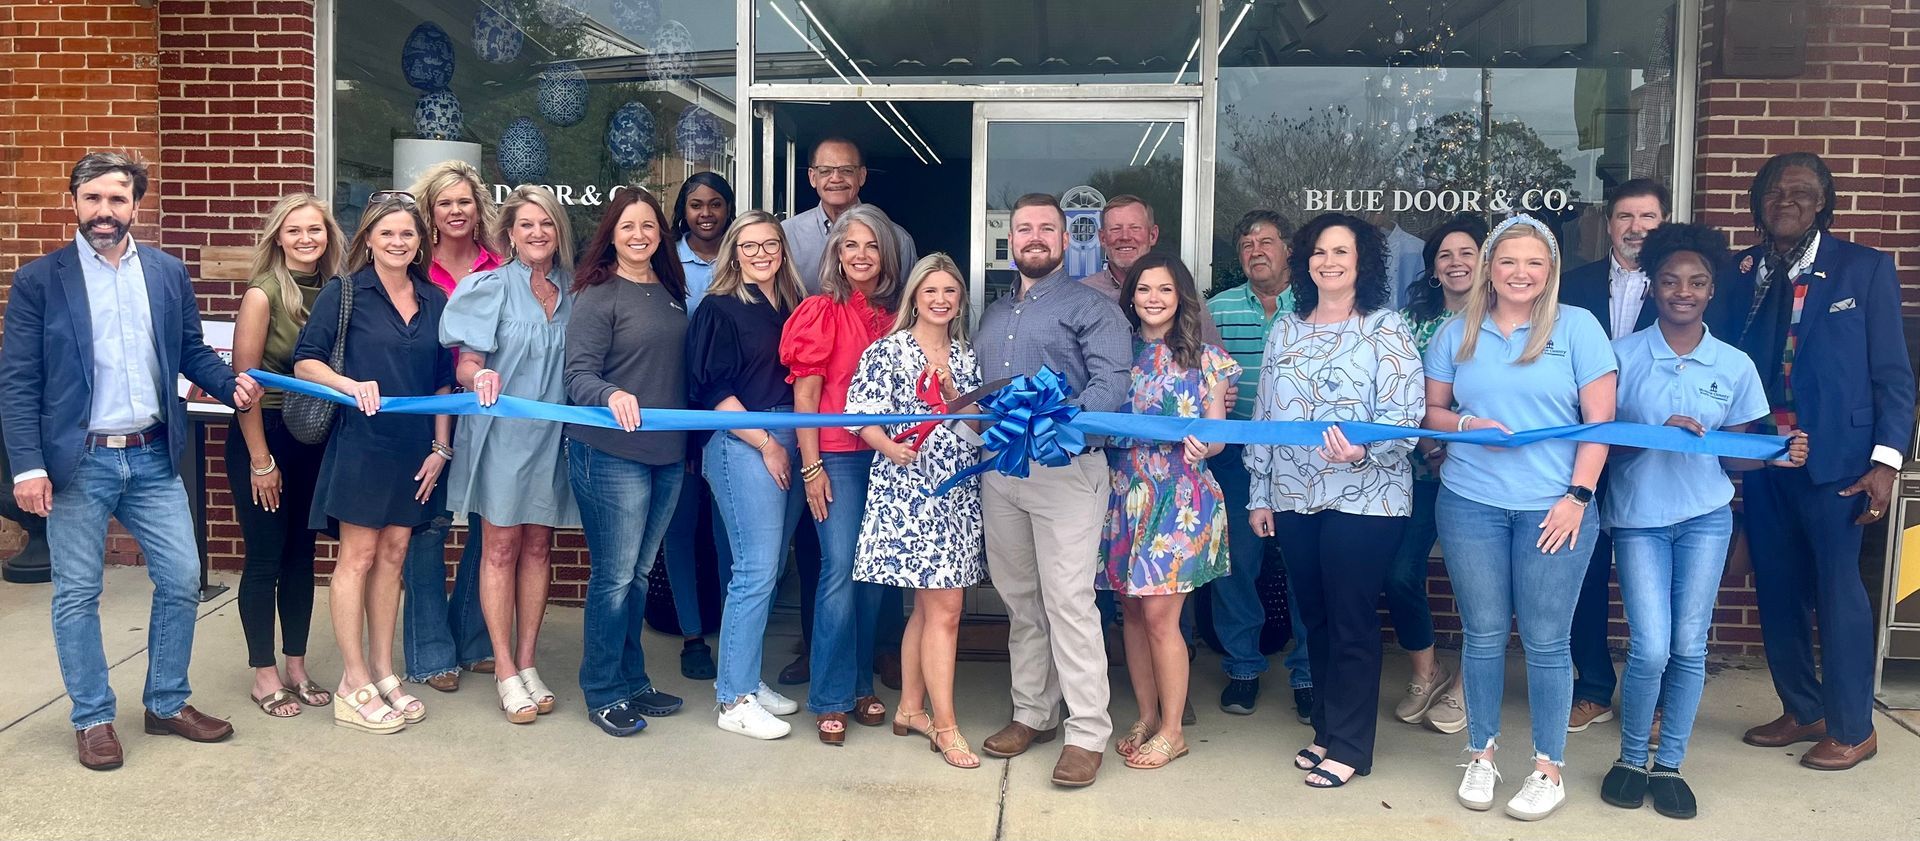 The Chamber recently hosted a ribbon cutting for new business Blue Door & Co. The boutique offers a wide variety of clothing for women and men as well as jewelry, shoes, and other accessories.  Open on the downtown square on Wednesday-Friday from 10 am until 5:30 pm and Saturdays 10 am until 3 pm.  